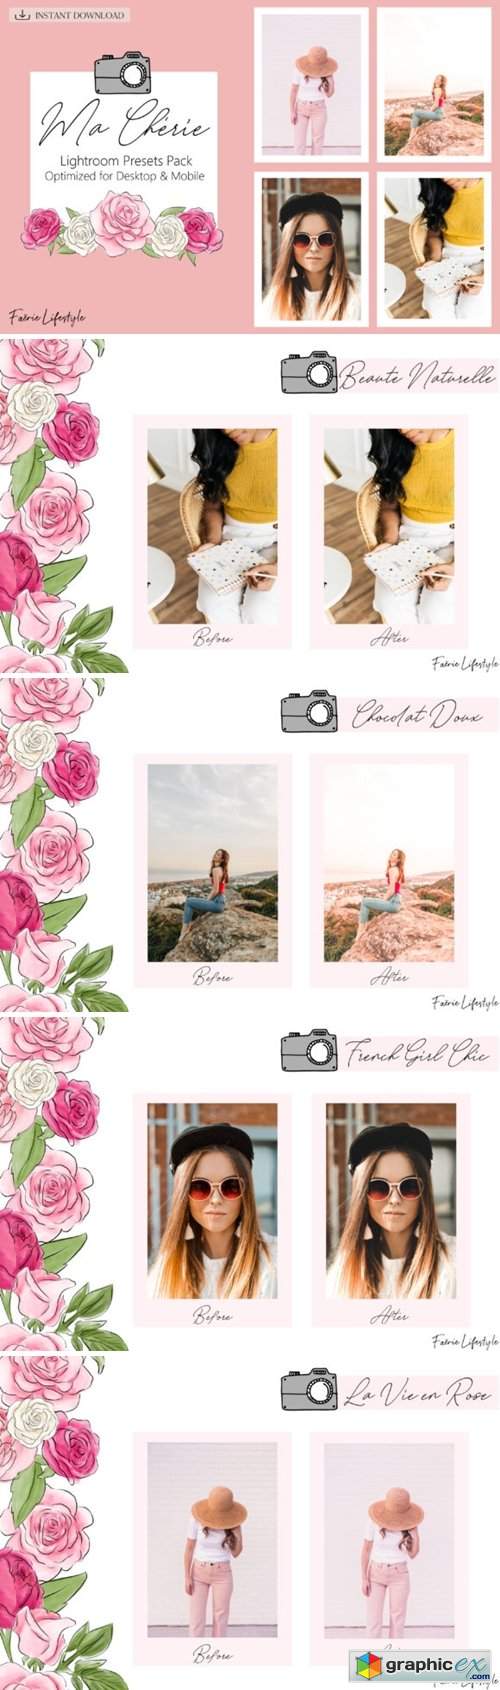 Ma Ch?rie Lightroom Presets Pack